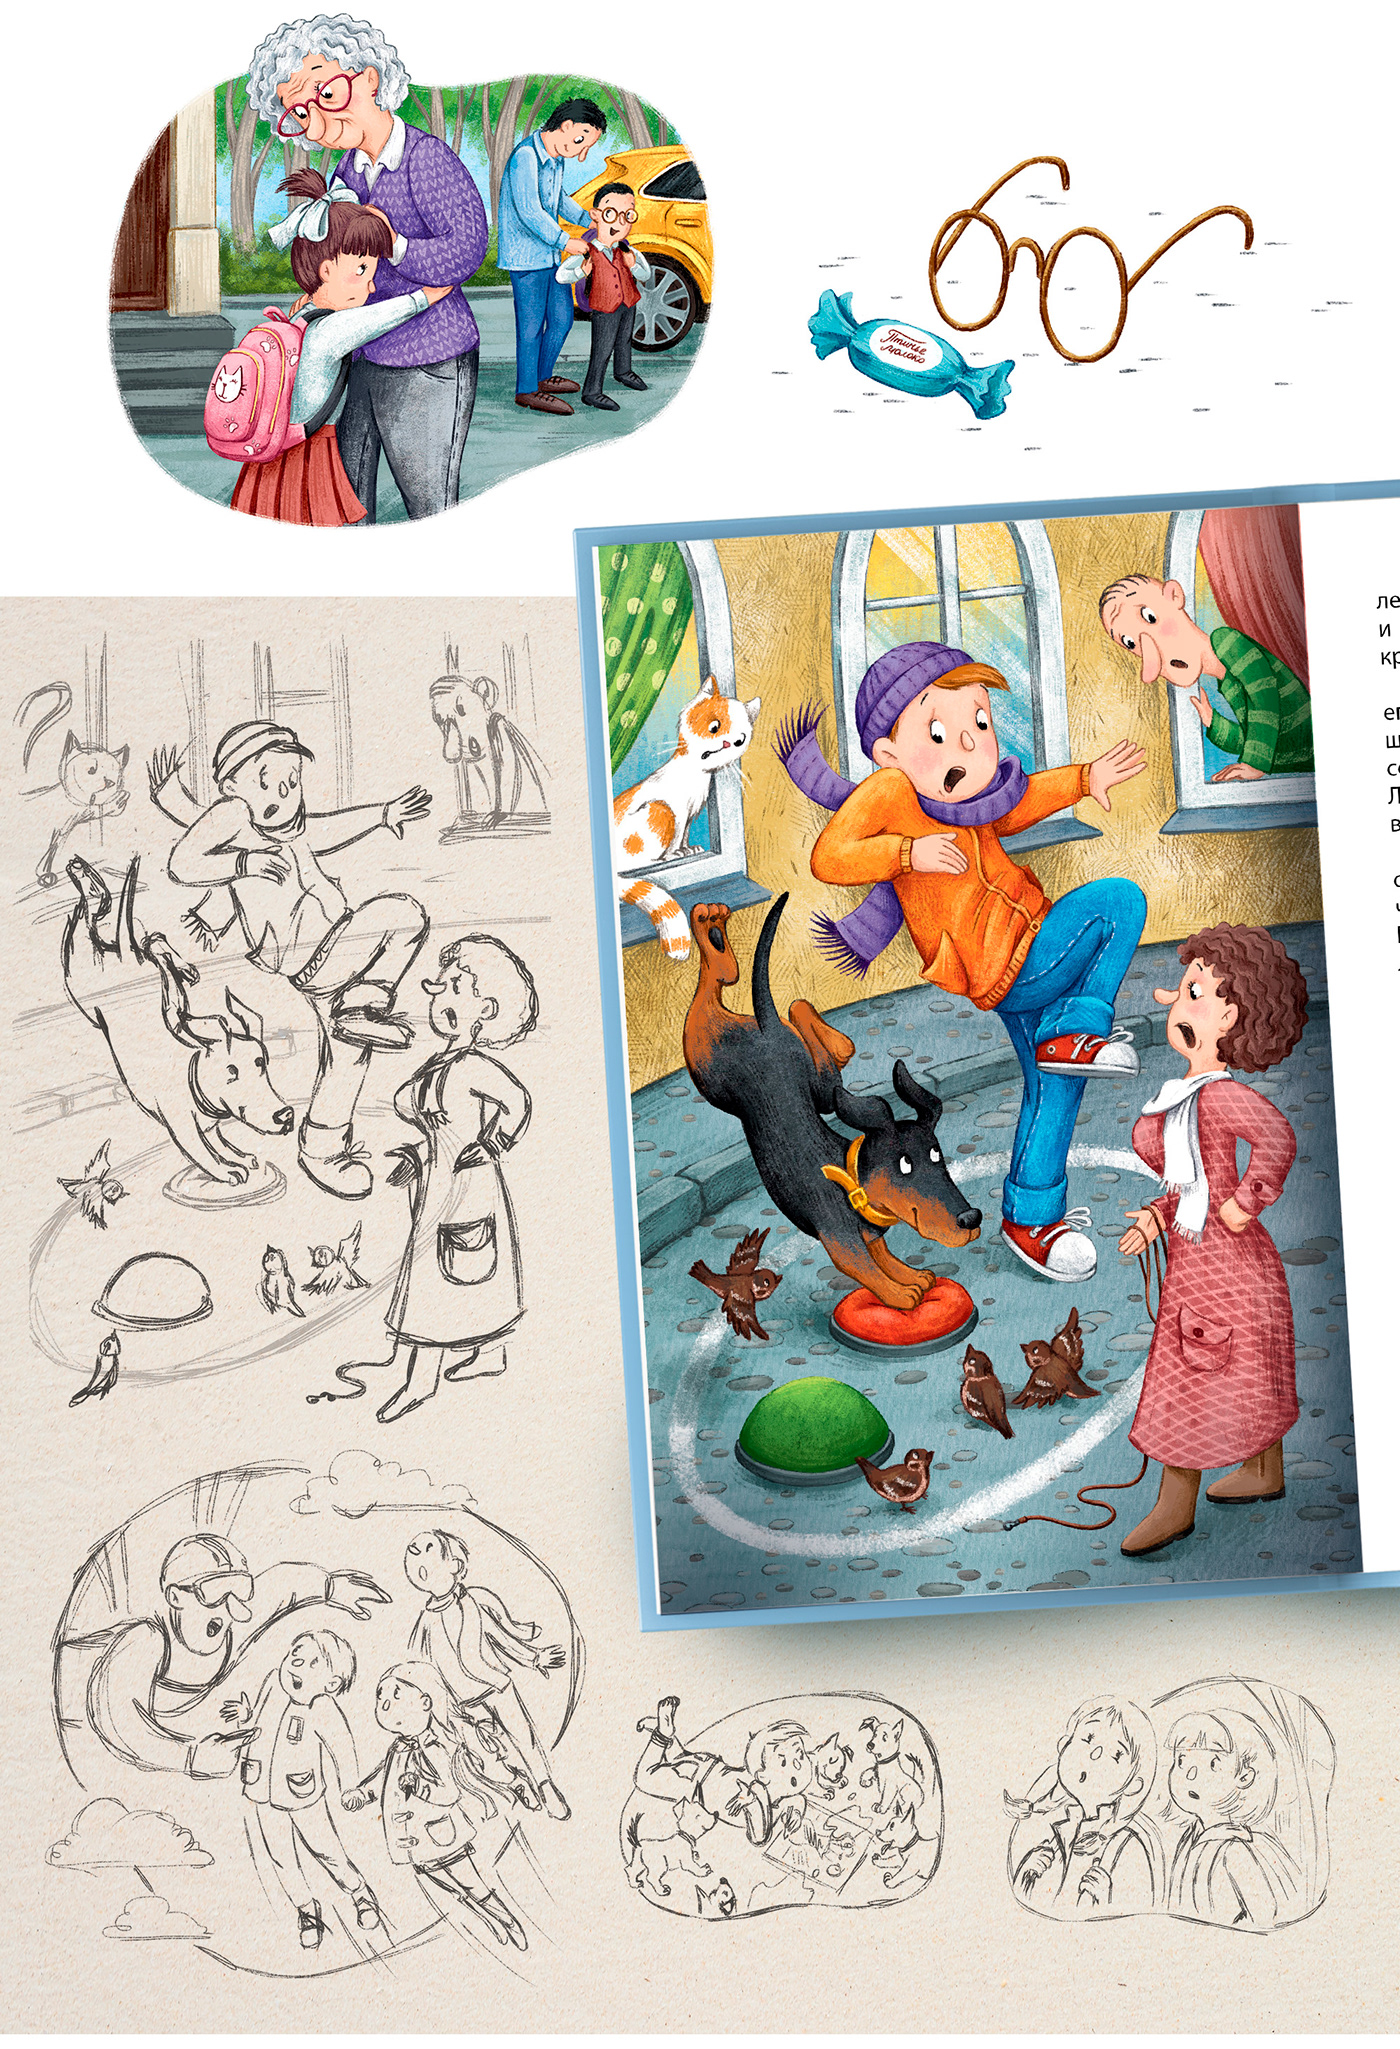 Illustrations for a book
with short funny stories
about children.